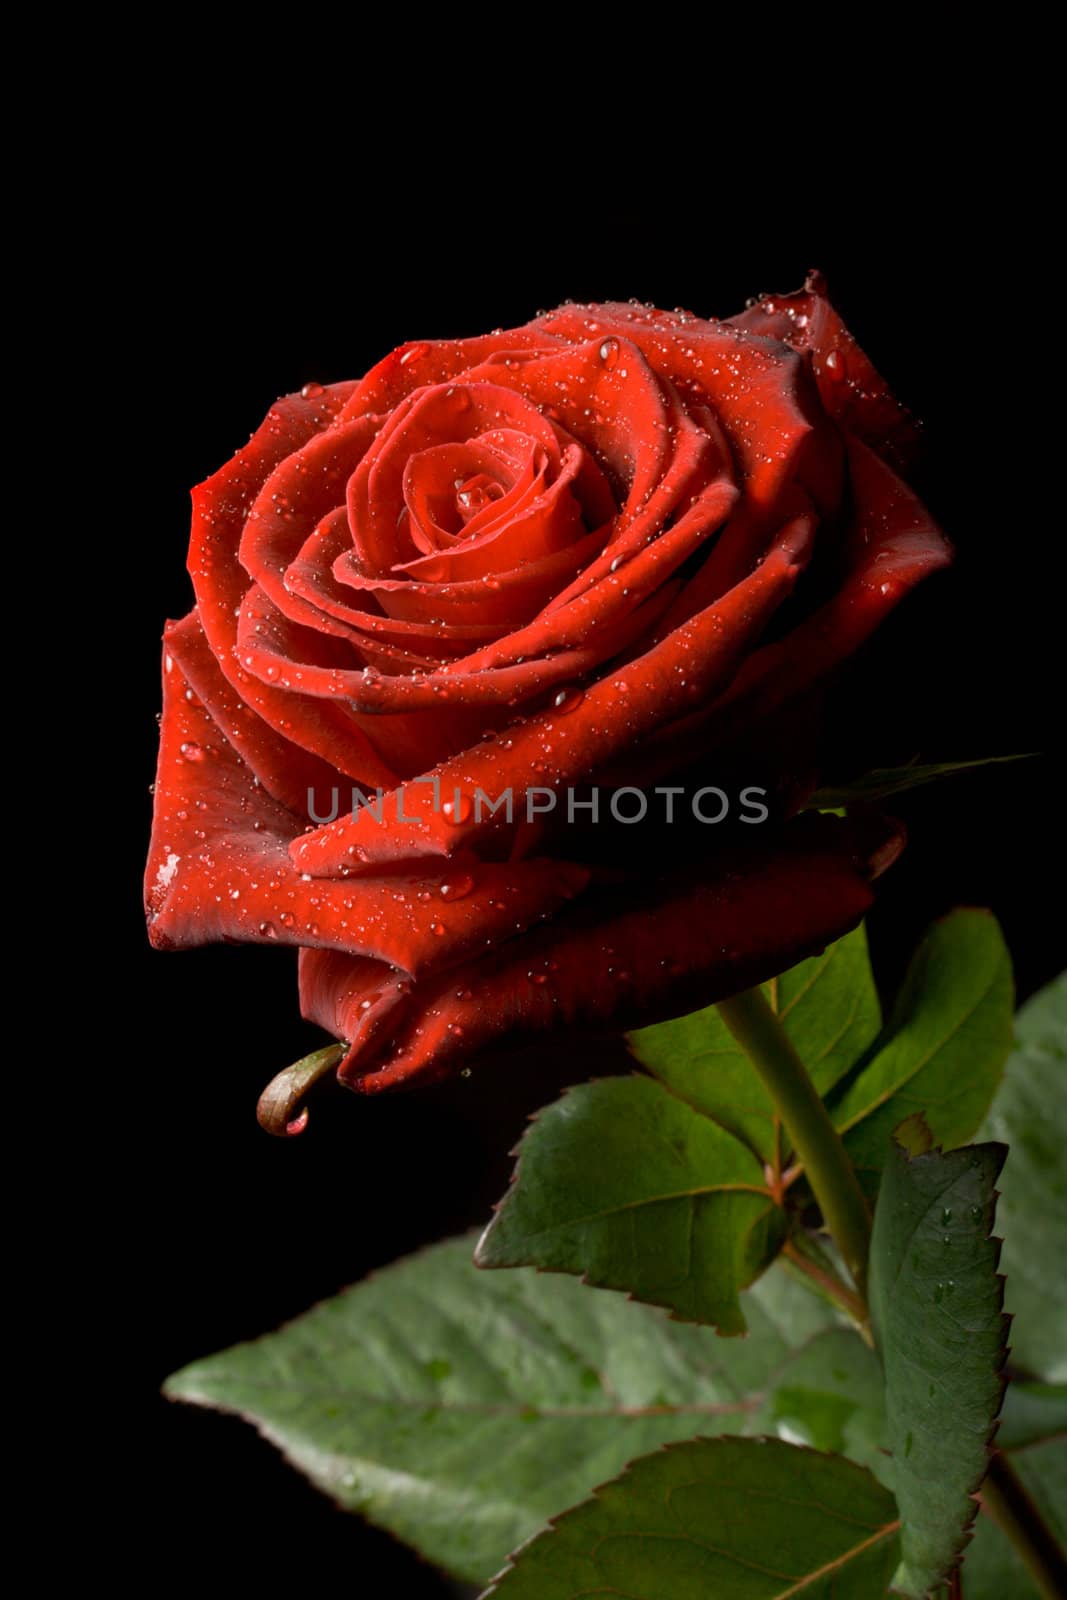 Red rose with drops of water on black background close up